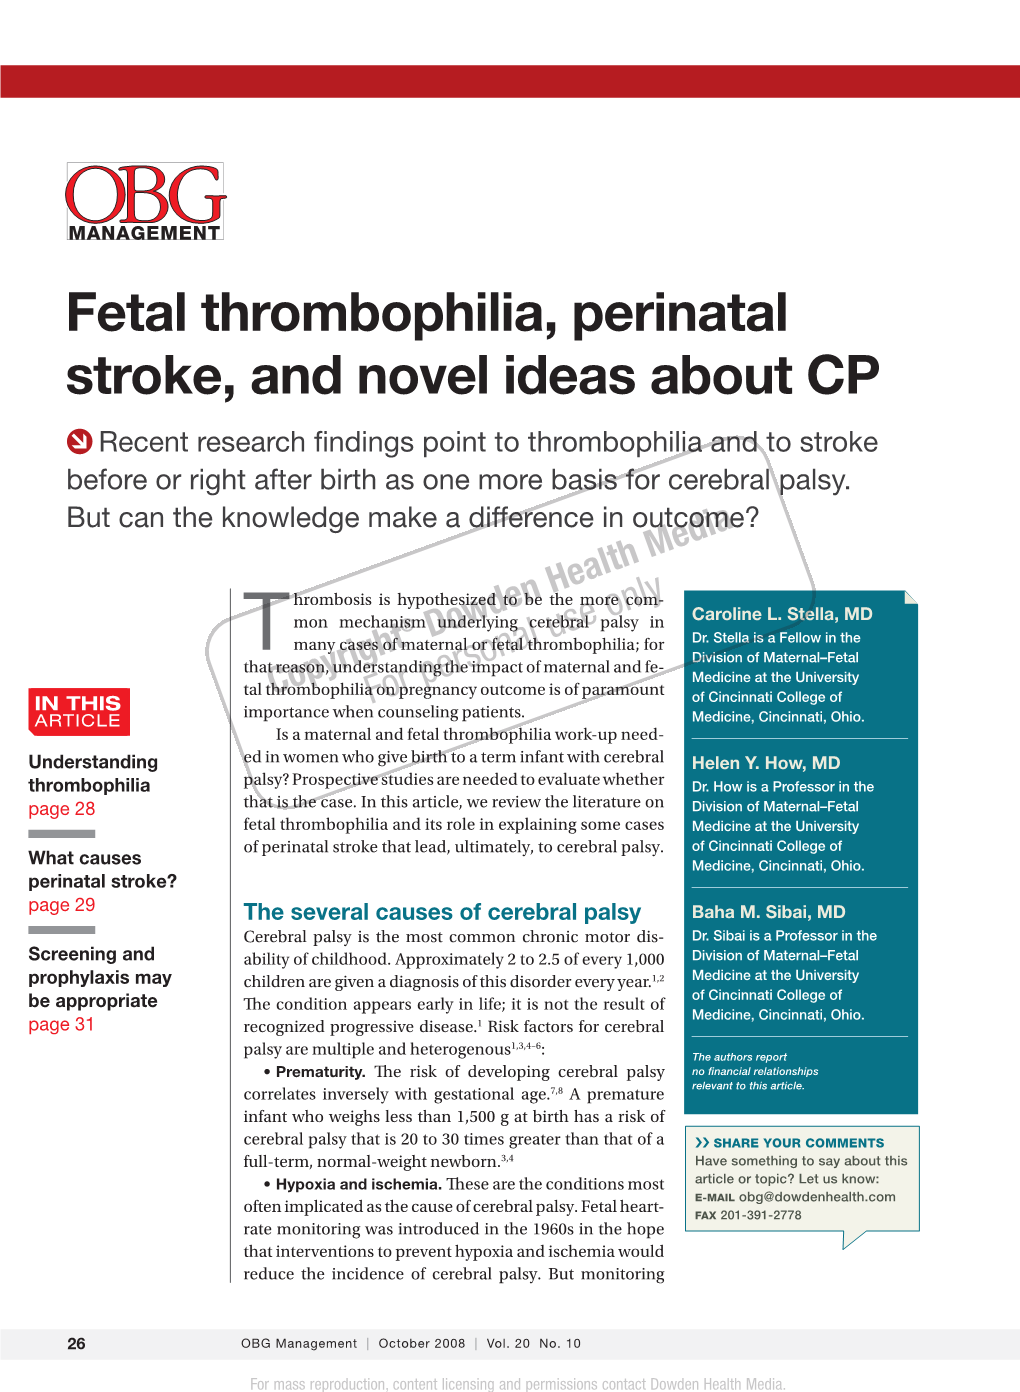 Fetal Thrombophilia, Perinatal Stroke, and Novel Ideas About CP